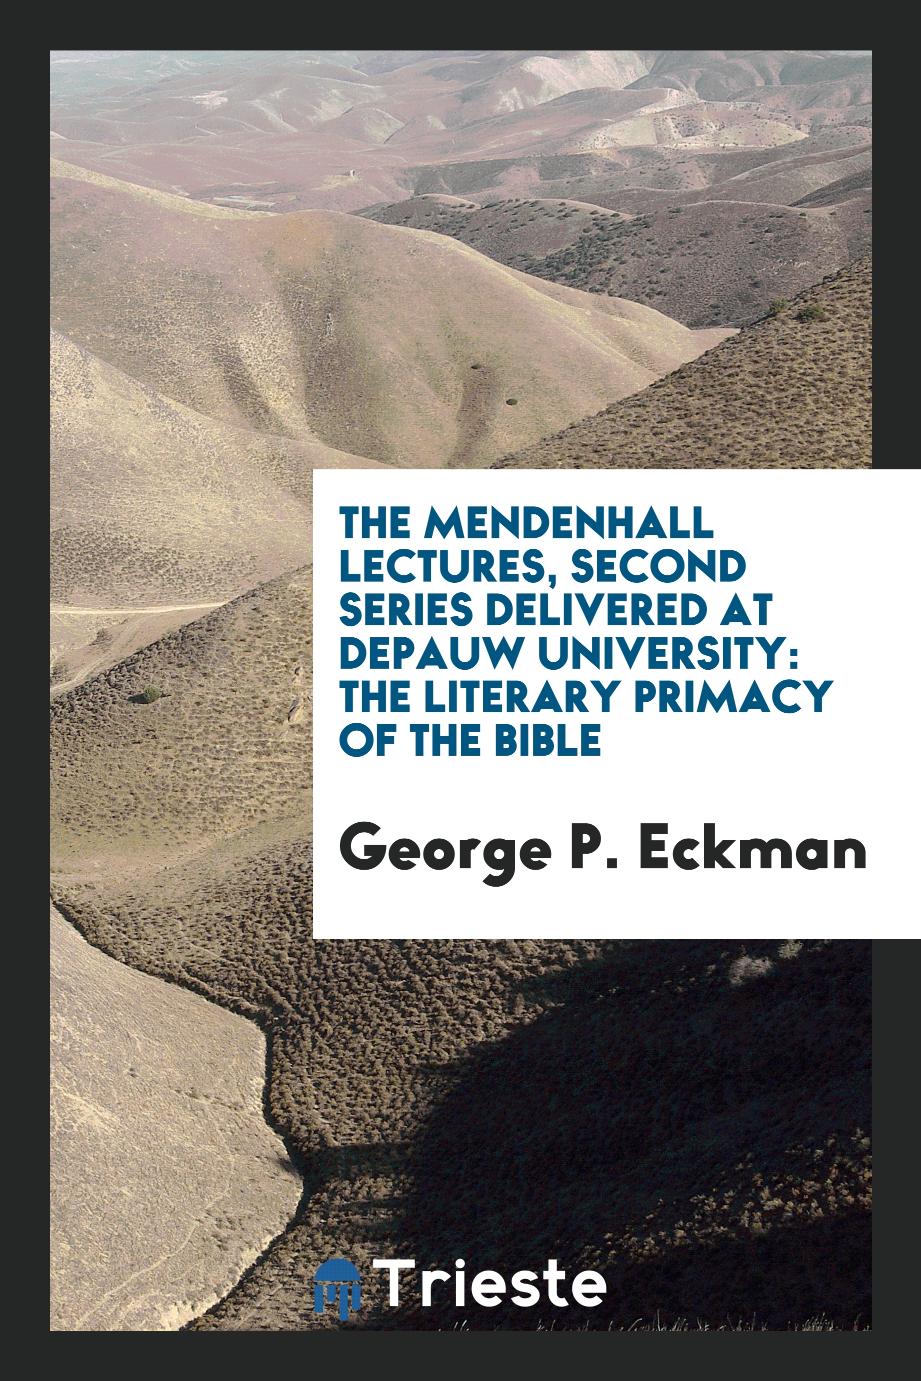 The Mendenhall Lectures, Second Series Delivered at DePauw University: The Literary Primacy of the Bible